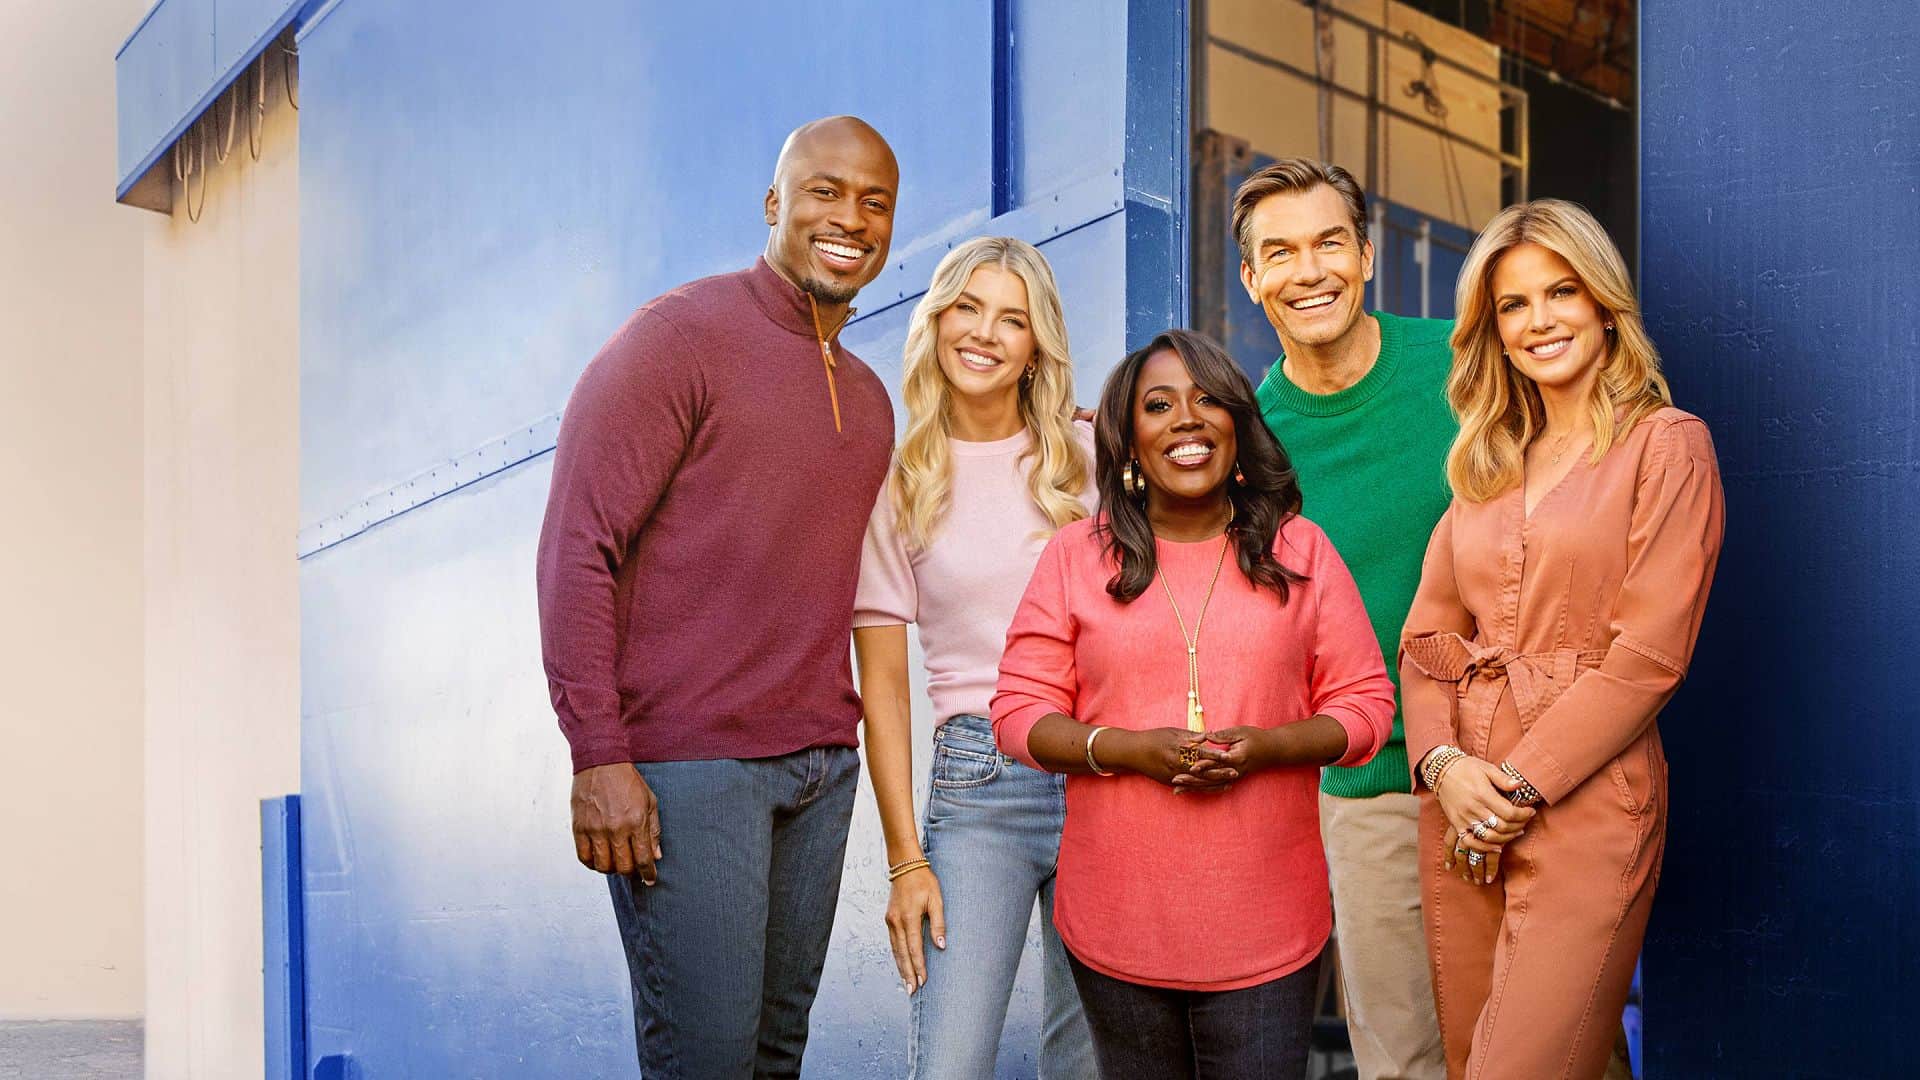 Two men and three women pose for a promo in this image from CBS Productions.